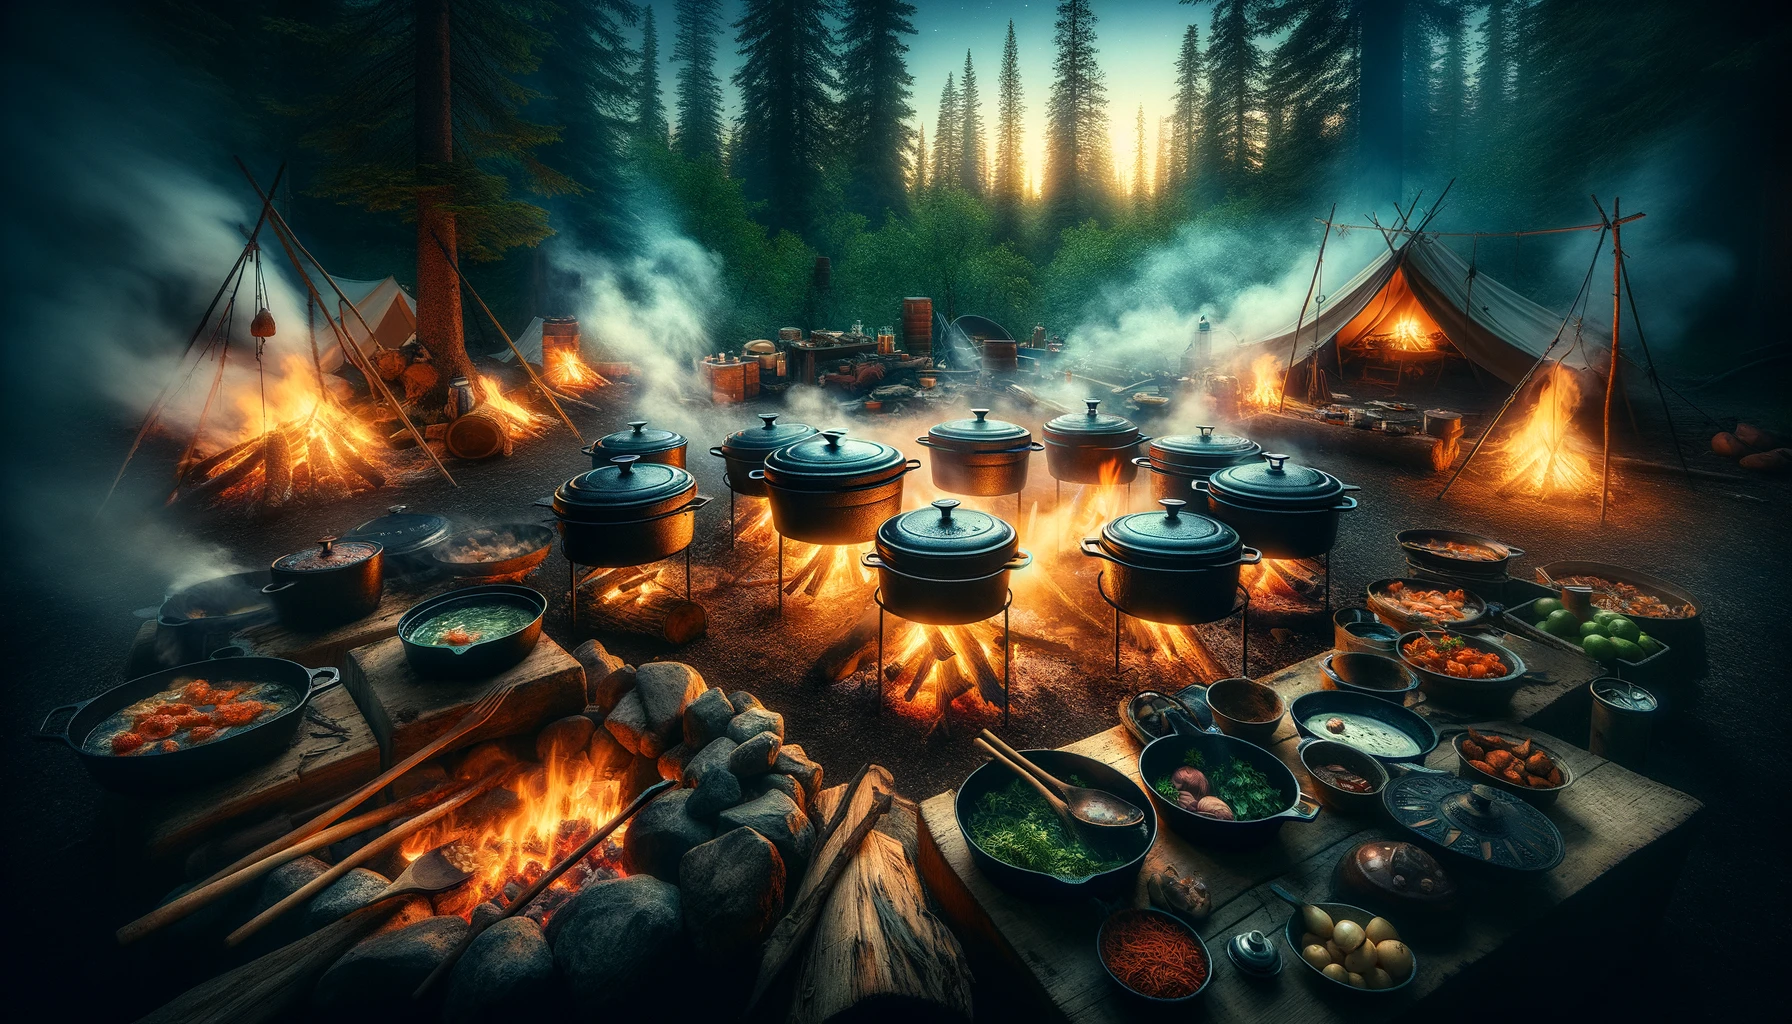 Serene forest campsite at twilight with a group preparing a feast using Dutch ovens over a campfire, highlighting the warmth of traditional outdoor cooking and the joy of communal meals in nature